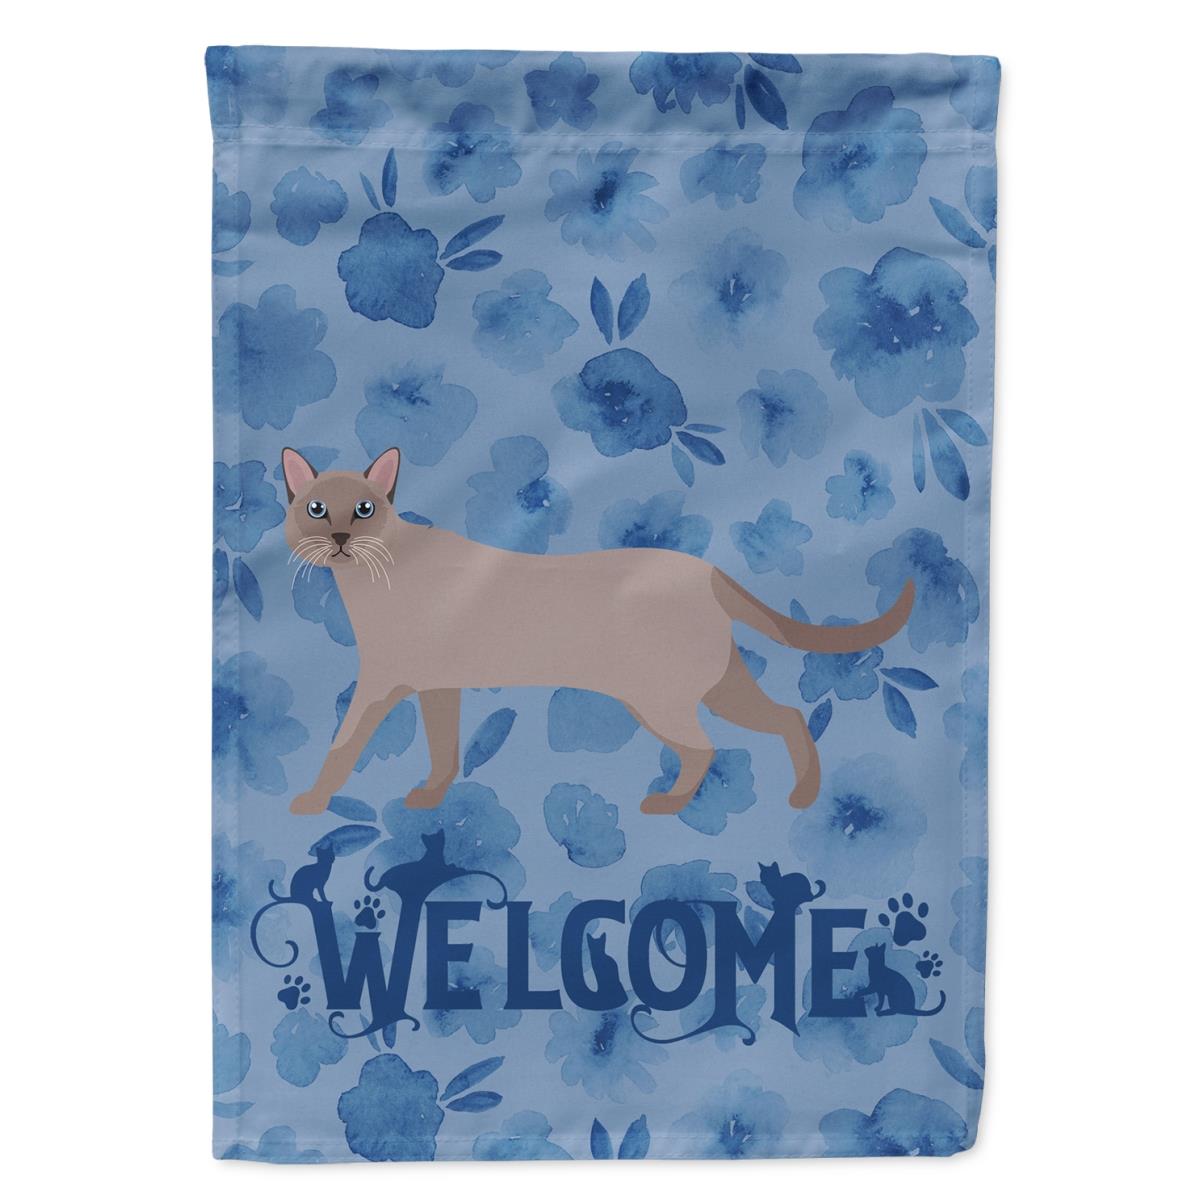 PatioPlus 11 x 0.01 x 15 in. Siamese Traditional No.1 Cat Welcome Flag Garden Size